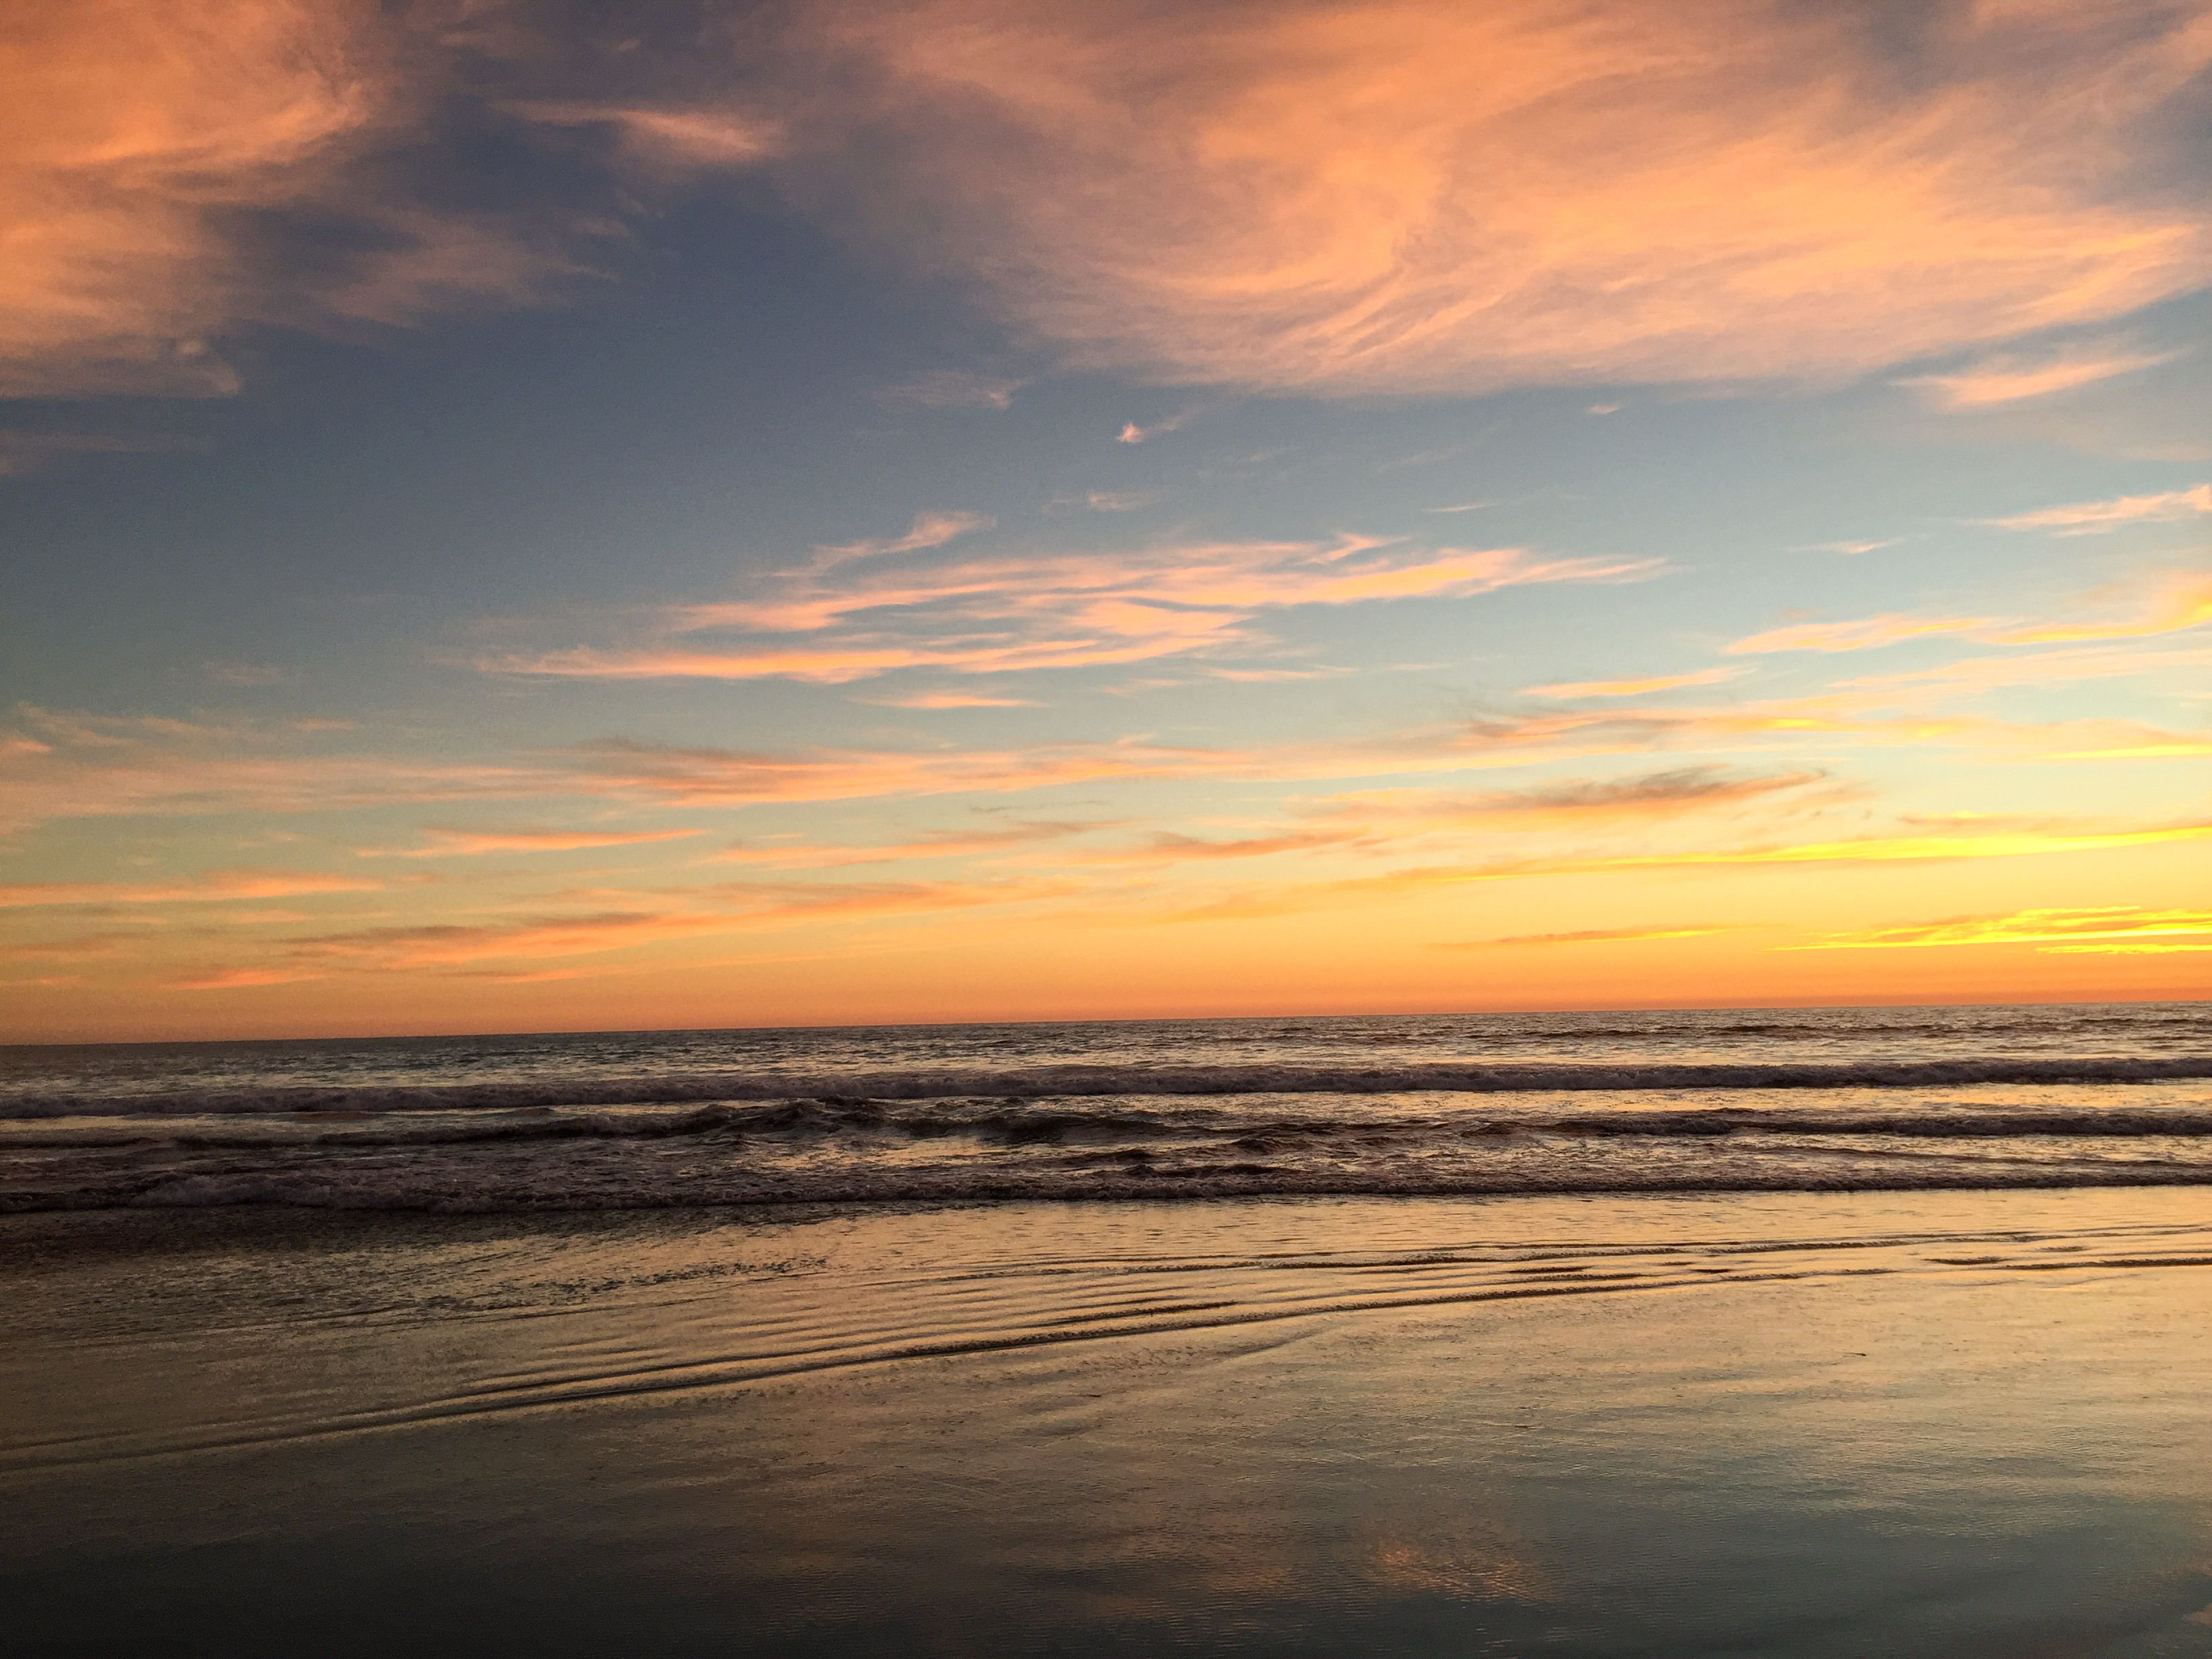 A wide ocean shore scene at sunset with magenta clouds, deep blue sky, and metallic water.